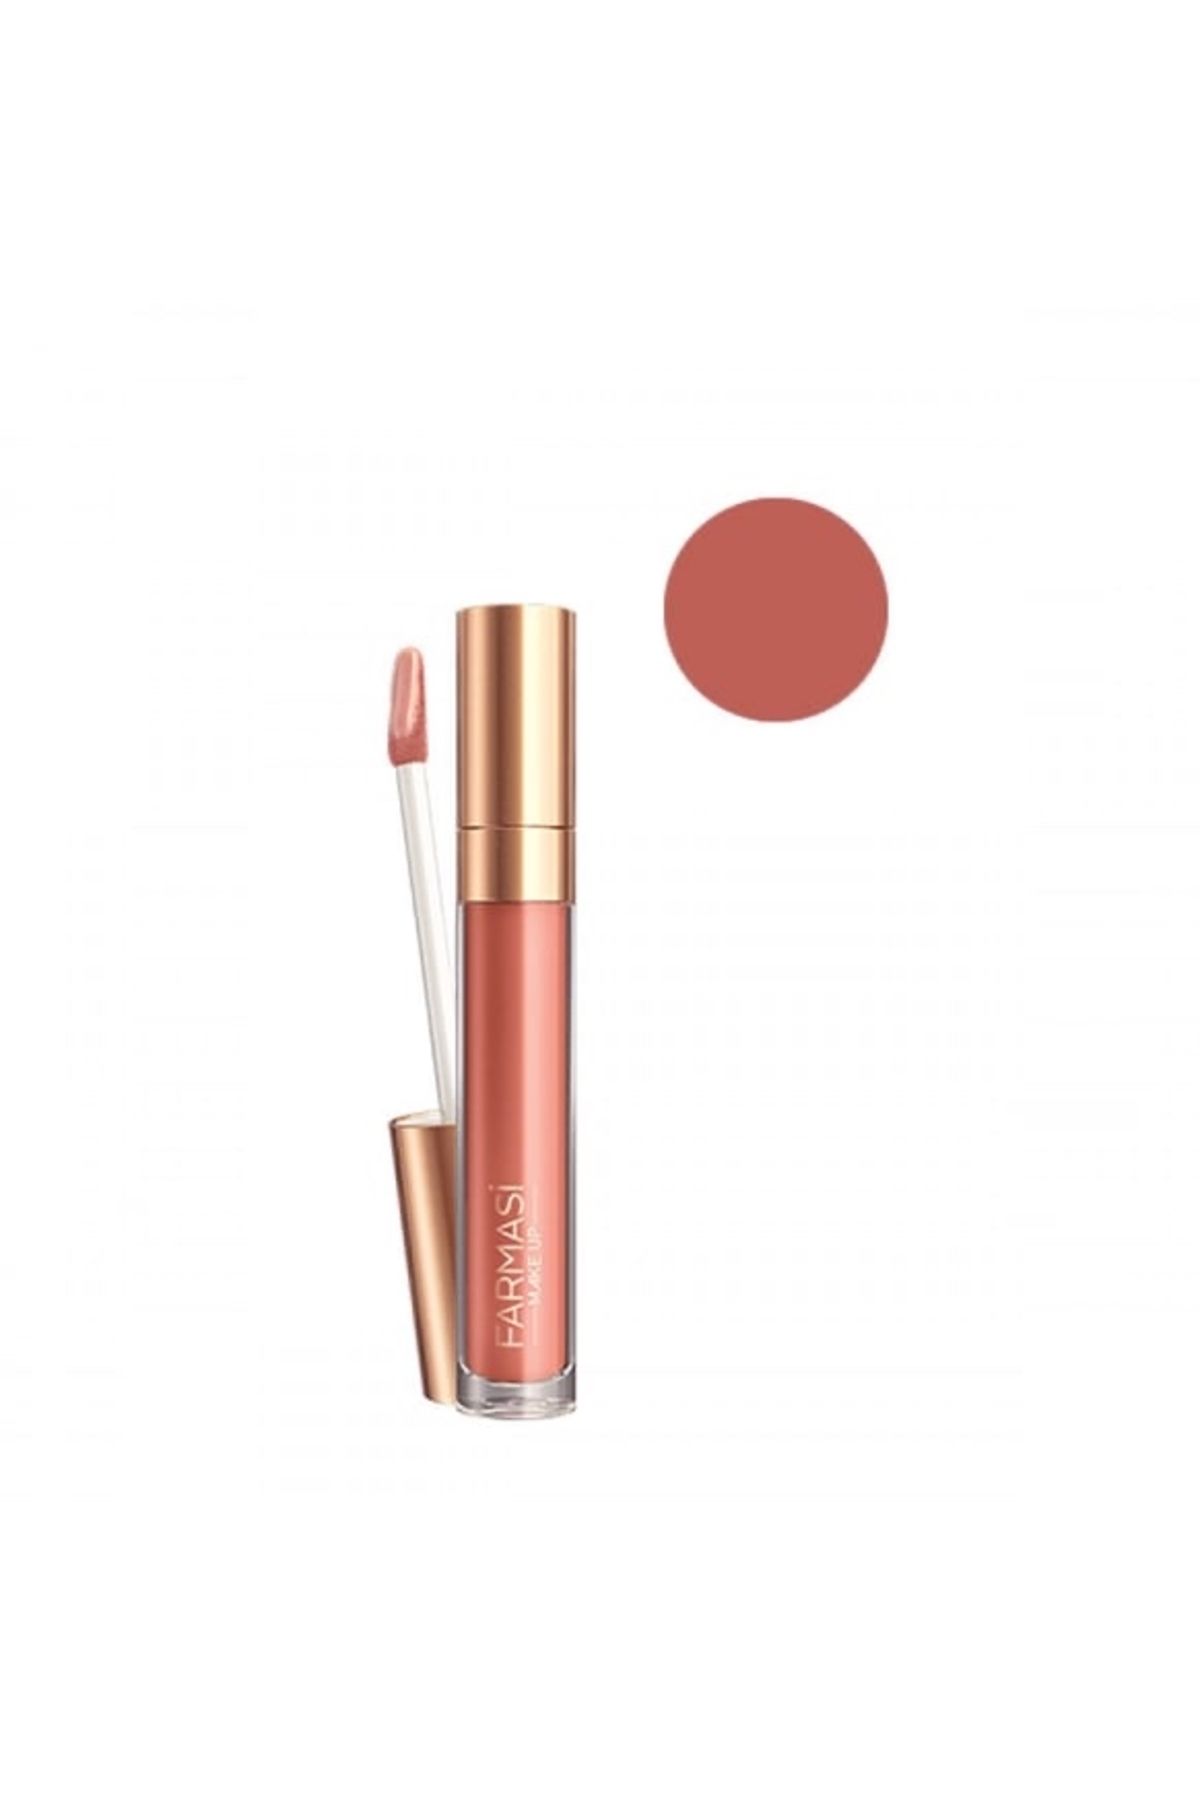 Farmasi Lip Gloss Nudes For All 03 Coral Baby 4ml 8690131777654